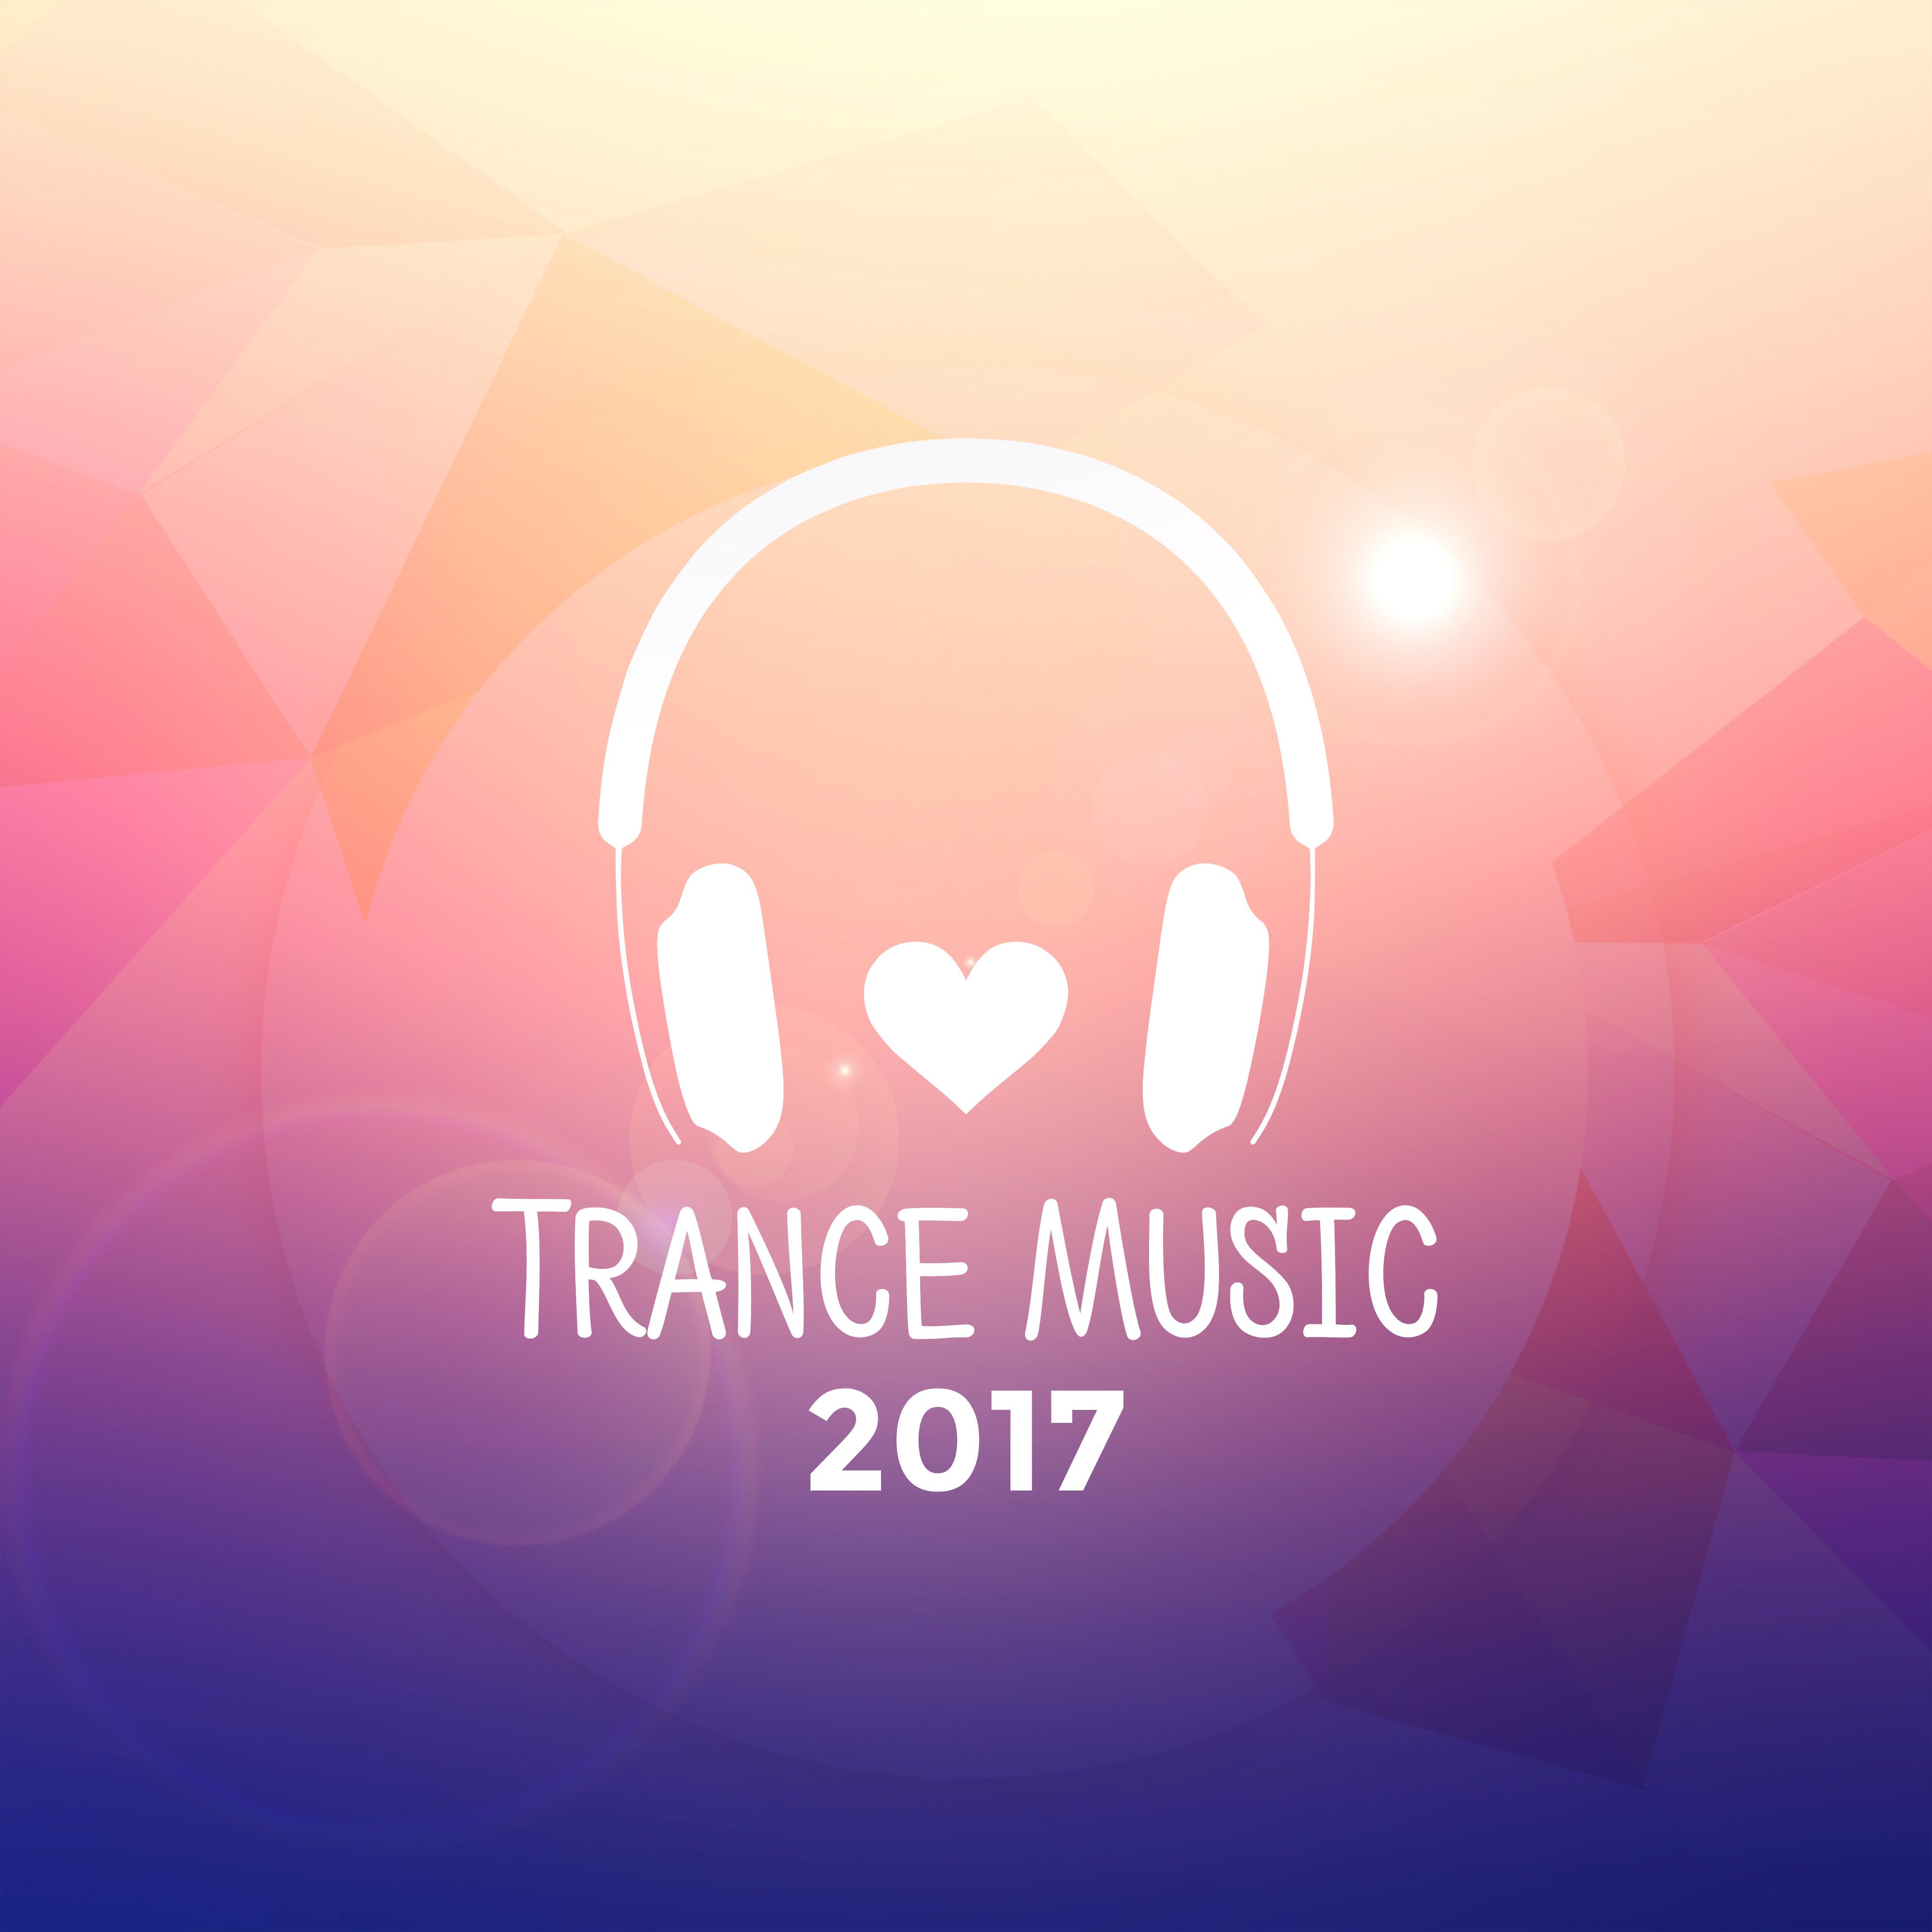 Trance Music 2017 – Chill Out, Lounge, Summer, Electronic Music, Positive Vibes